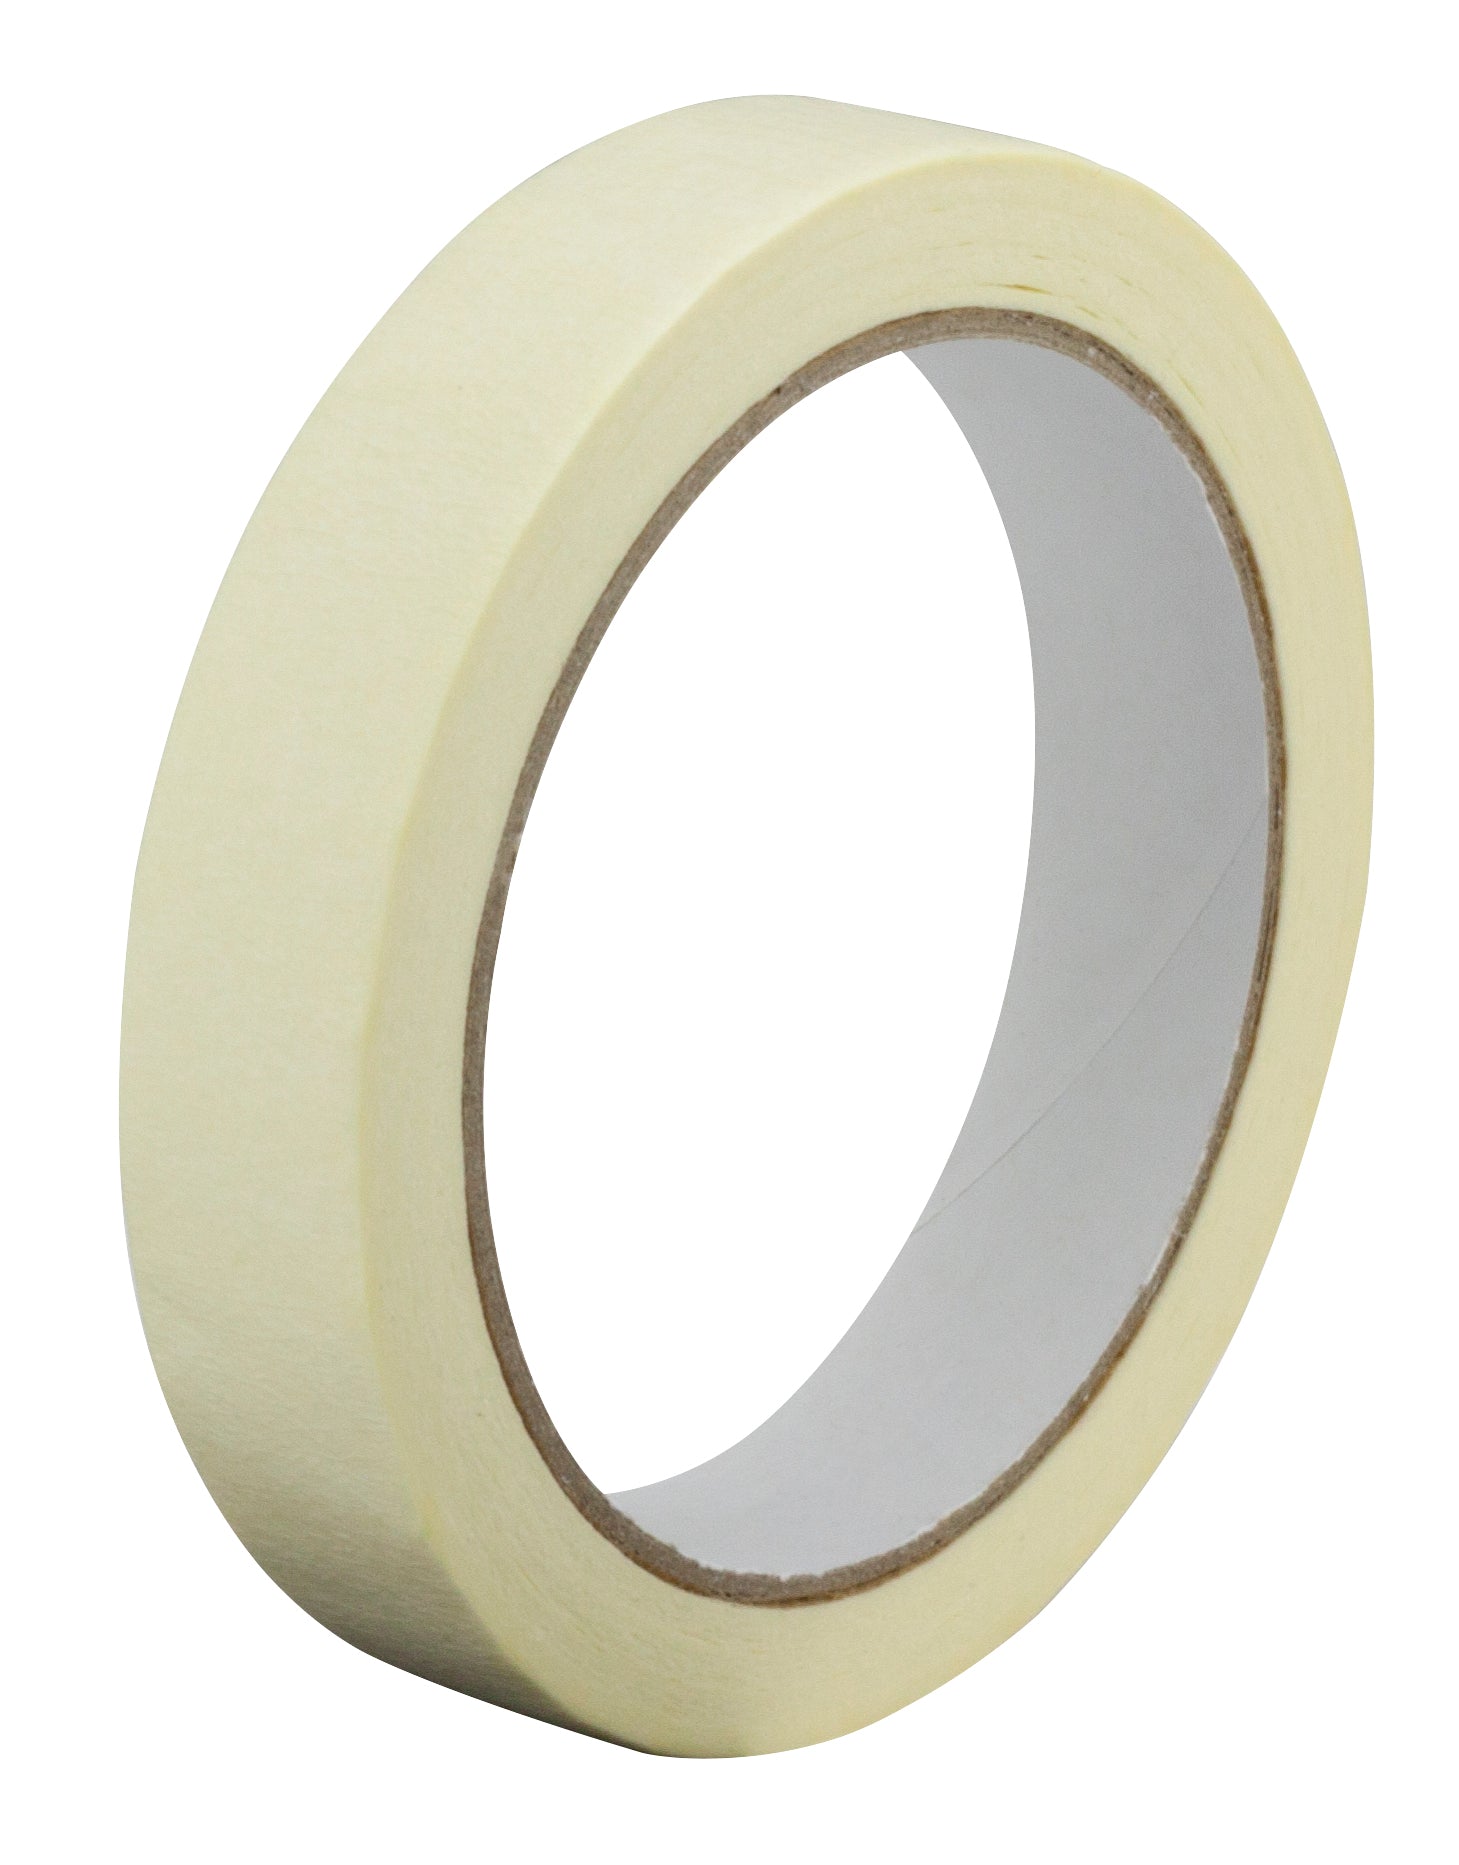 Masking Tape 19mm x 50m (General Purpose) 0.12mm Thickness  - Per Pack